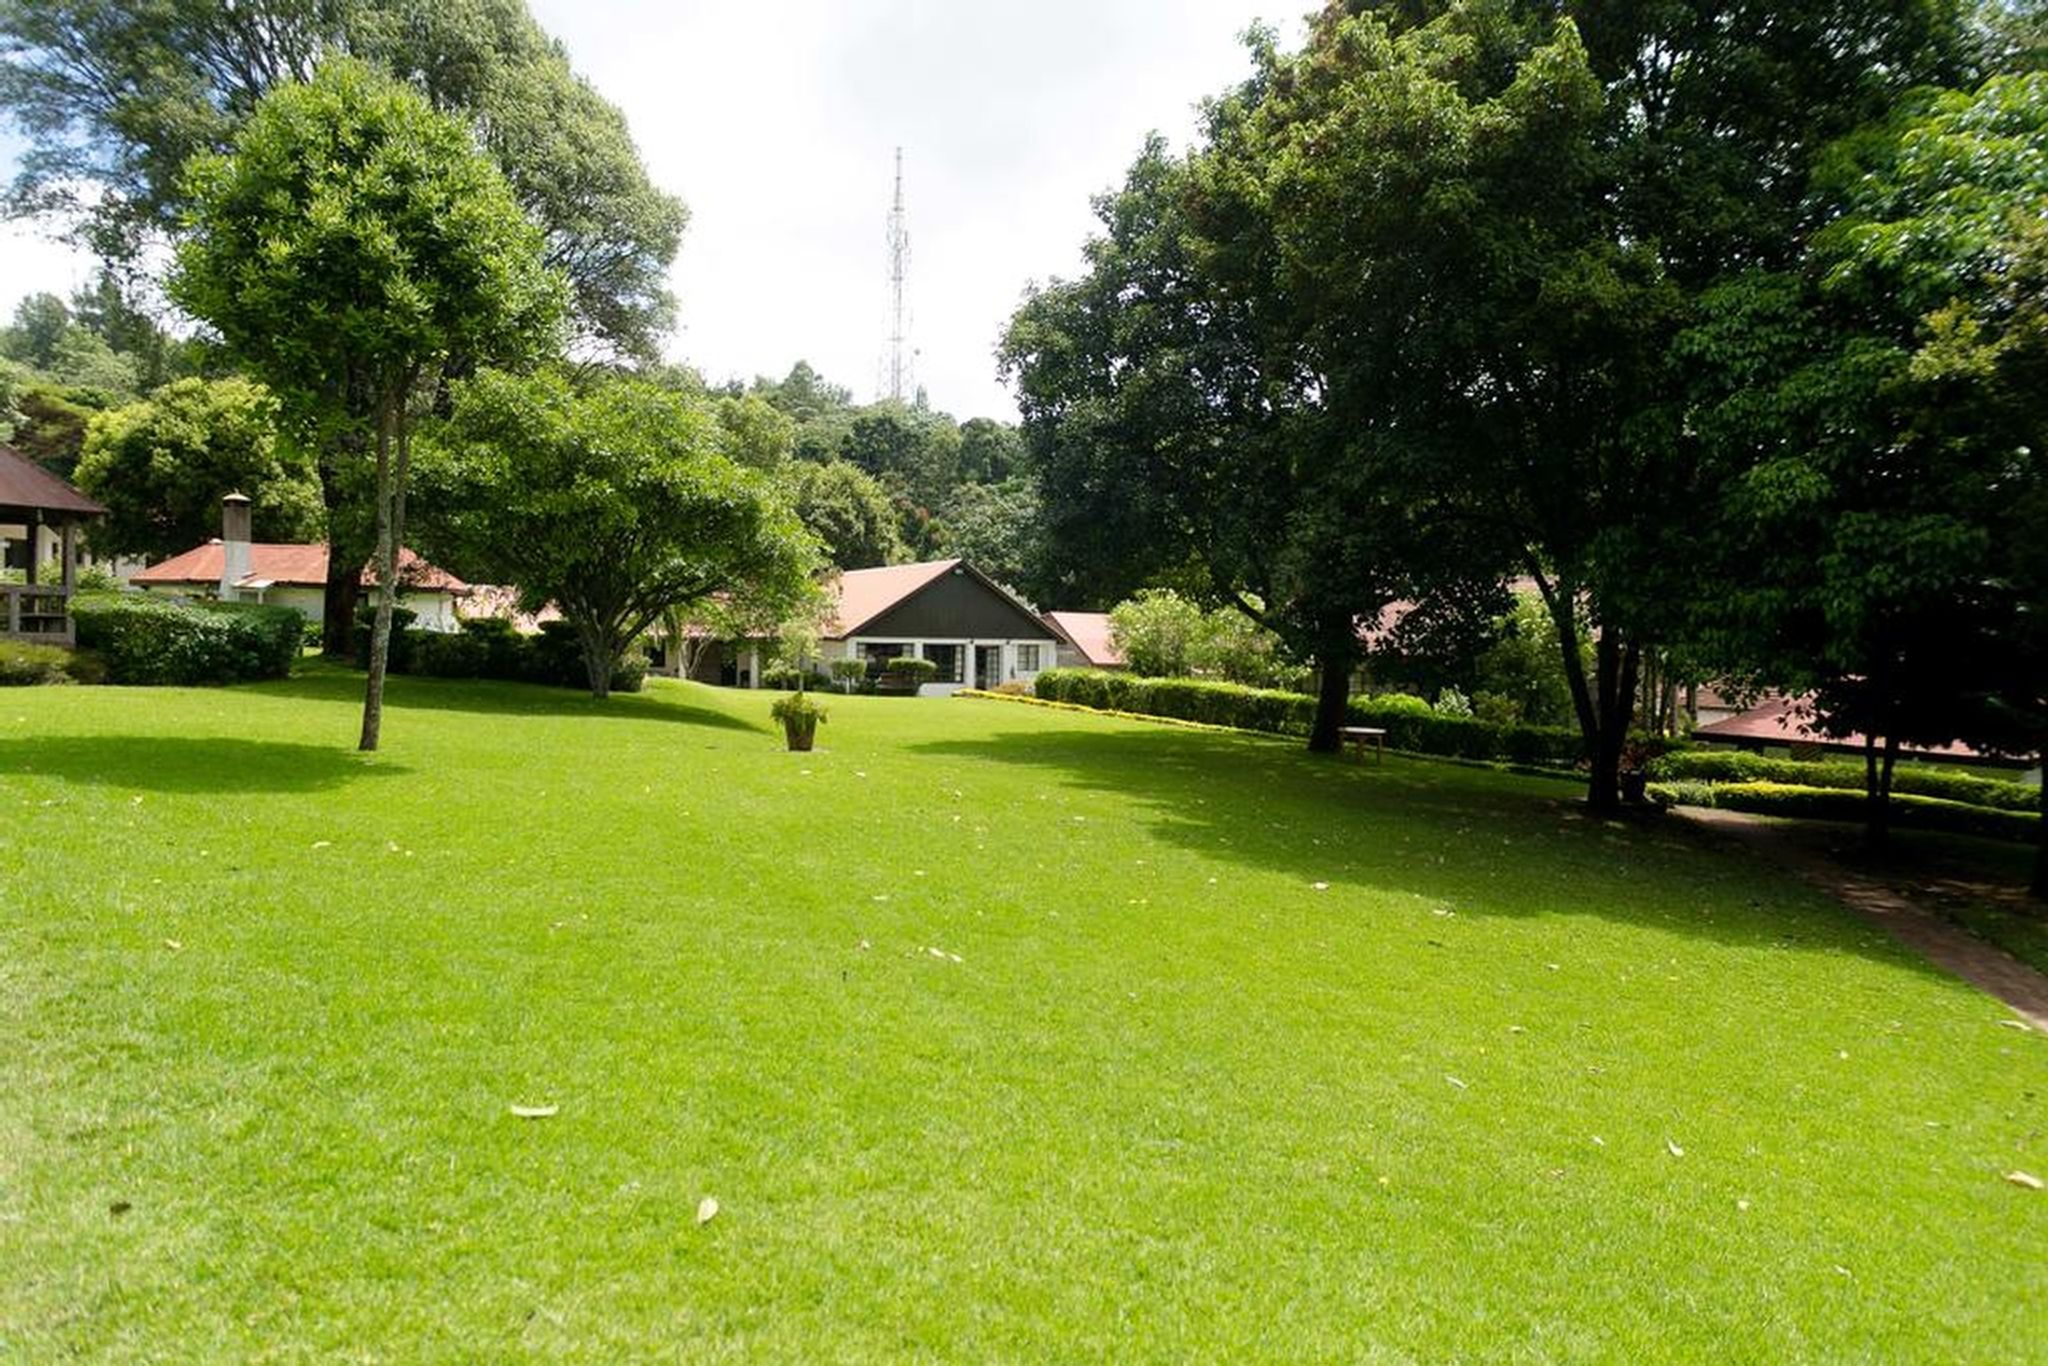 https://whownskenya.com/index.php/2022/11/02/list-of-the-most-beautiful-wedding-venues-in-limuru-and-their-charges/